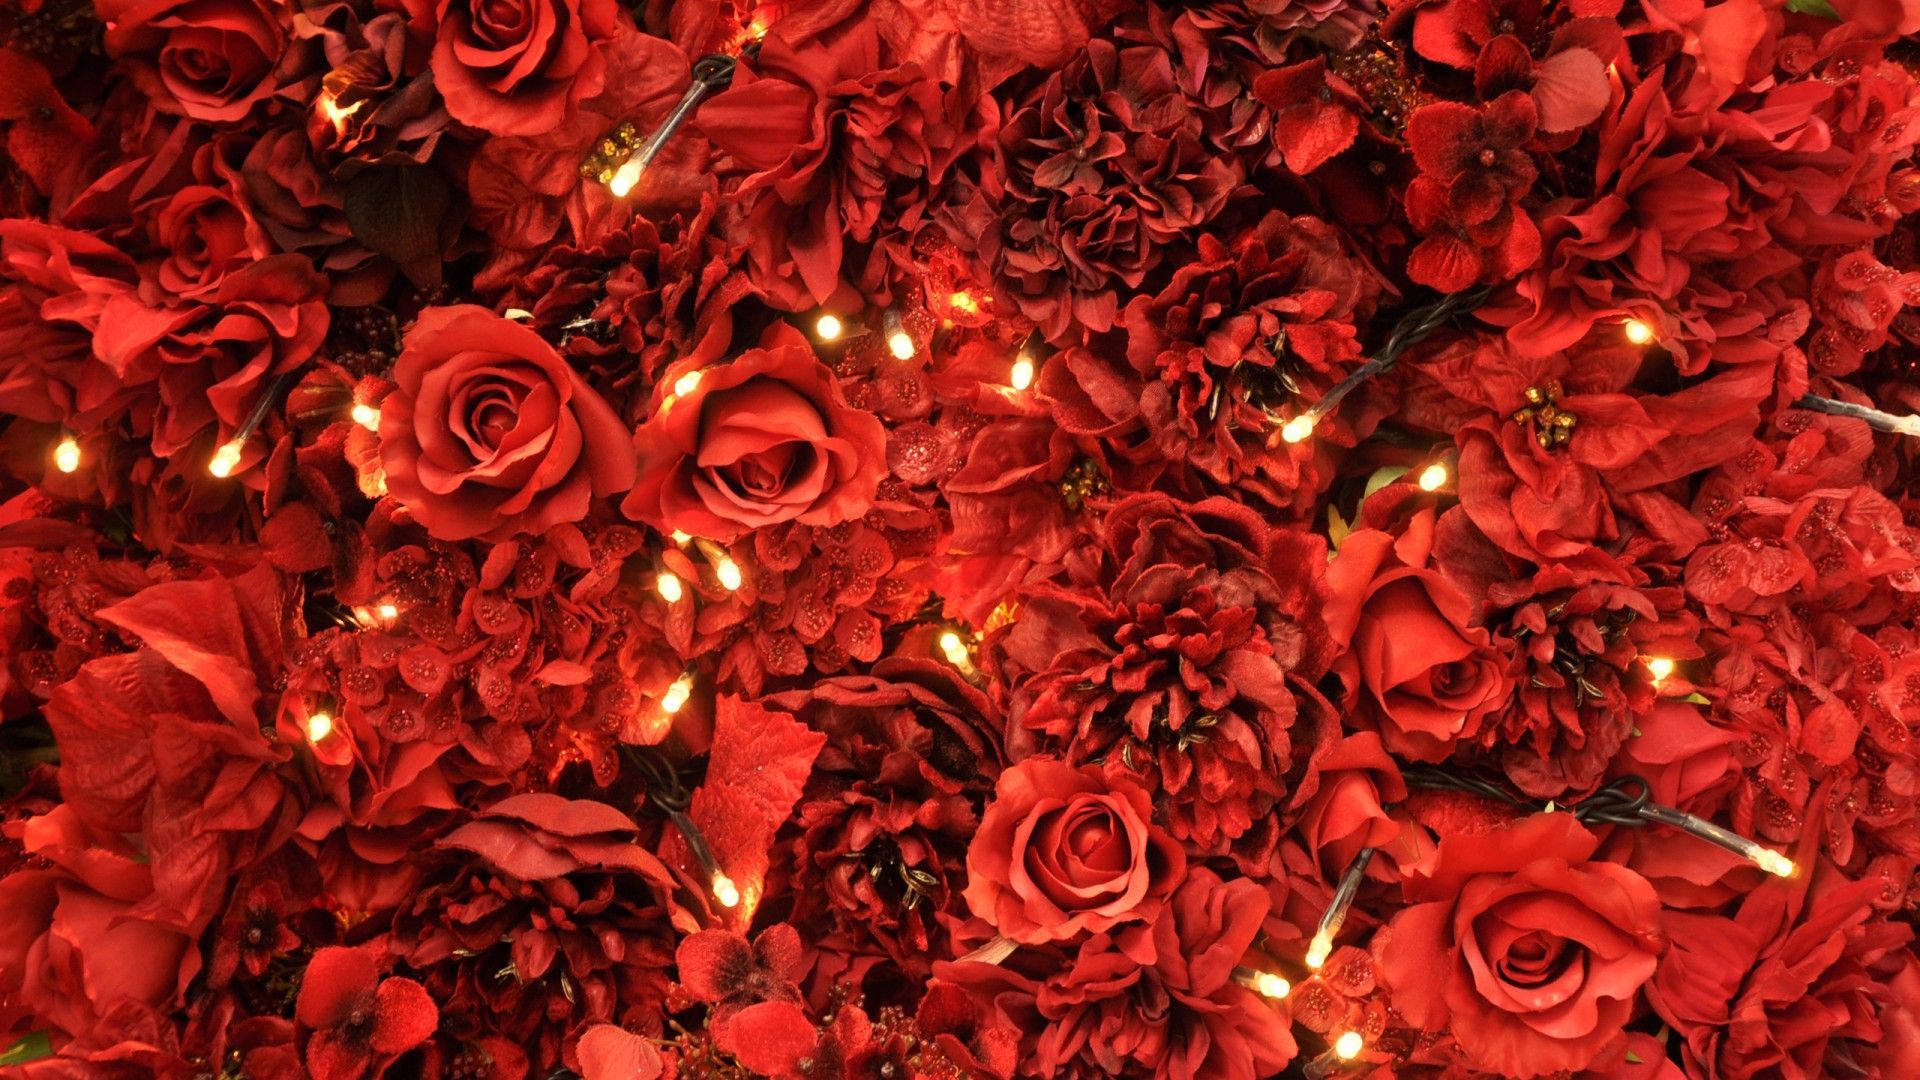 HD Flower Wallpapers Red Roses Lights